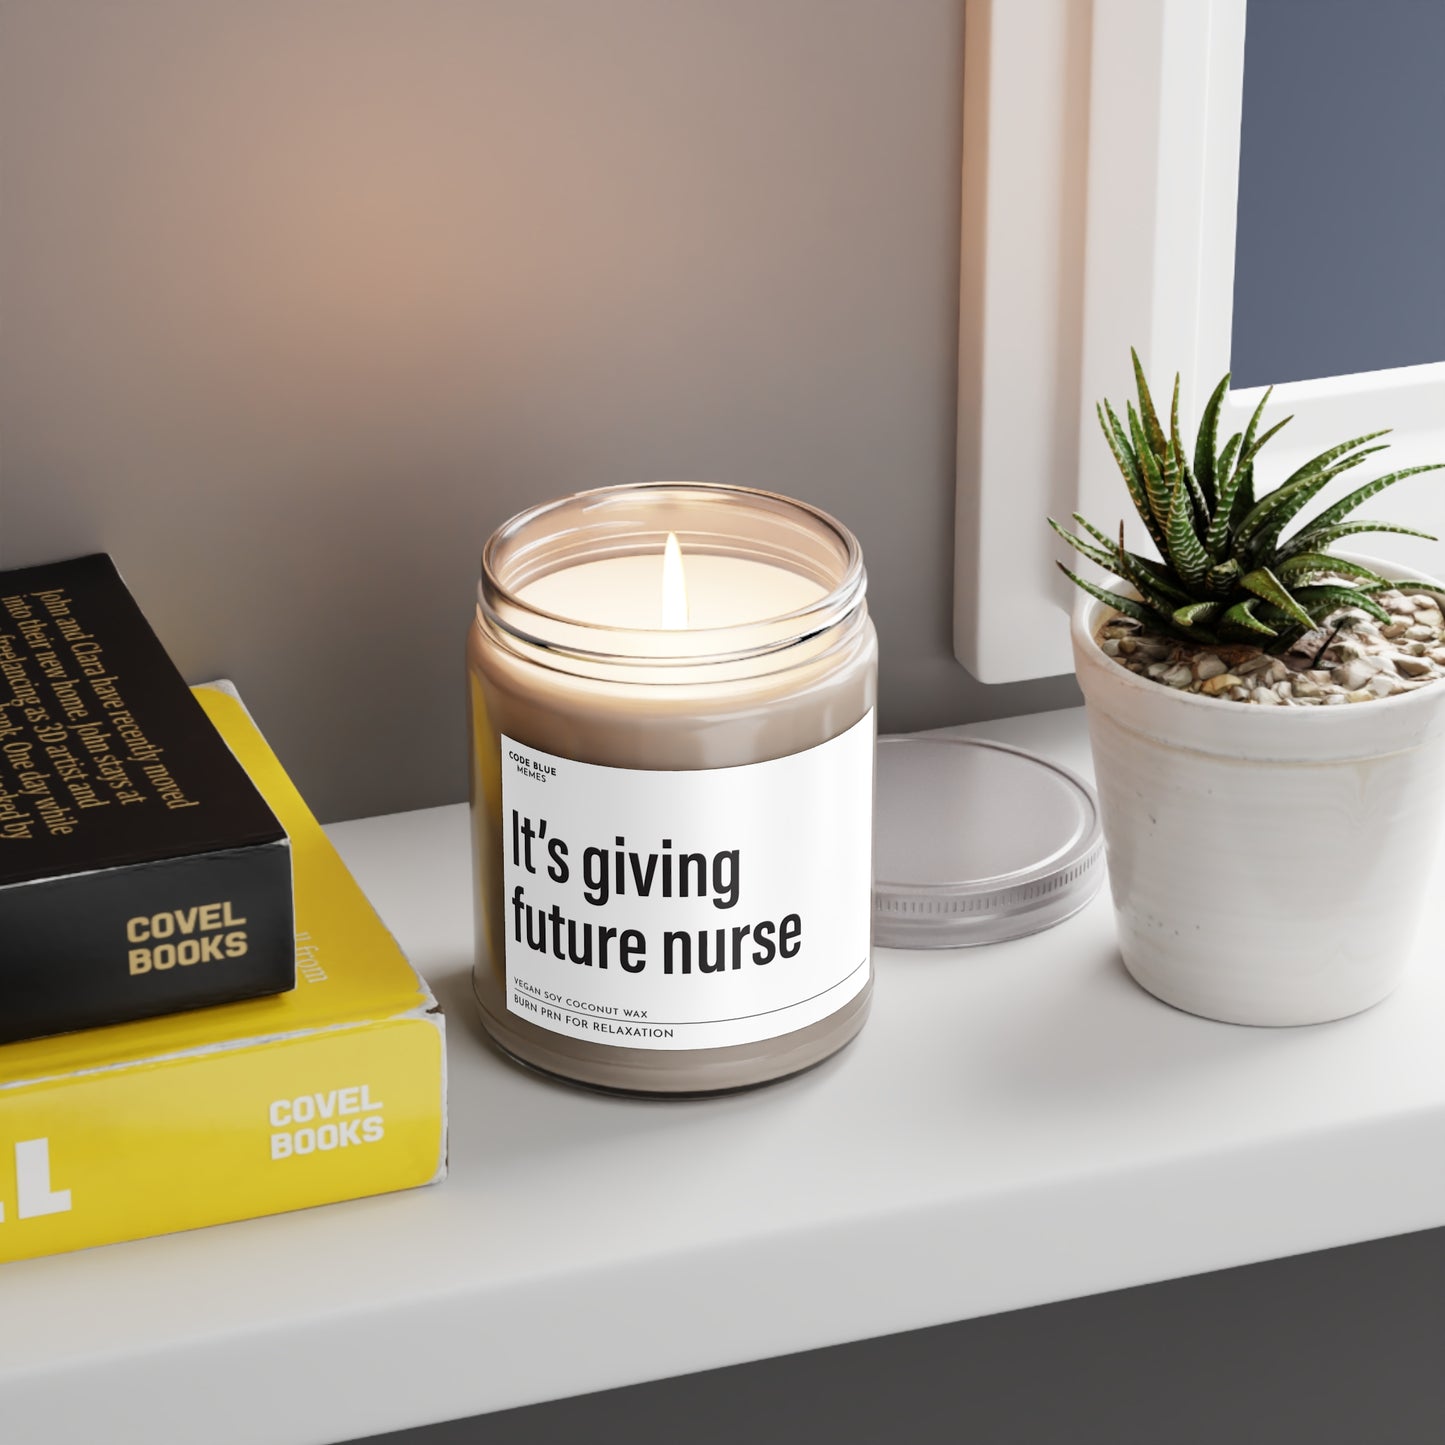 It's giving future nurse - scented candle